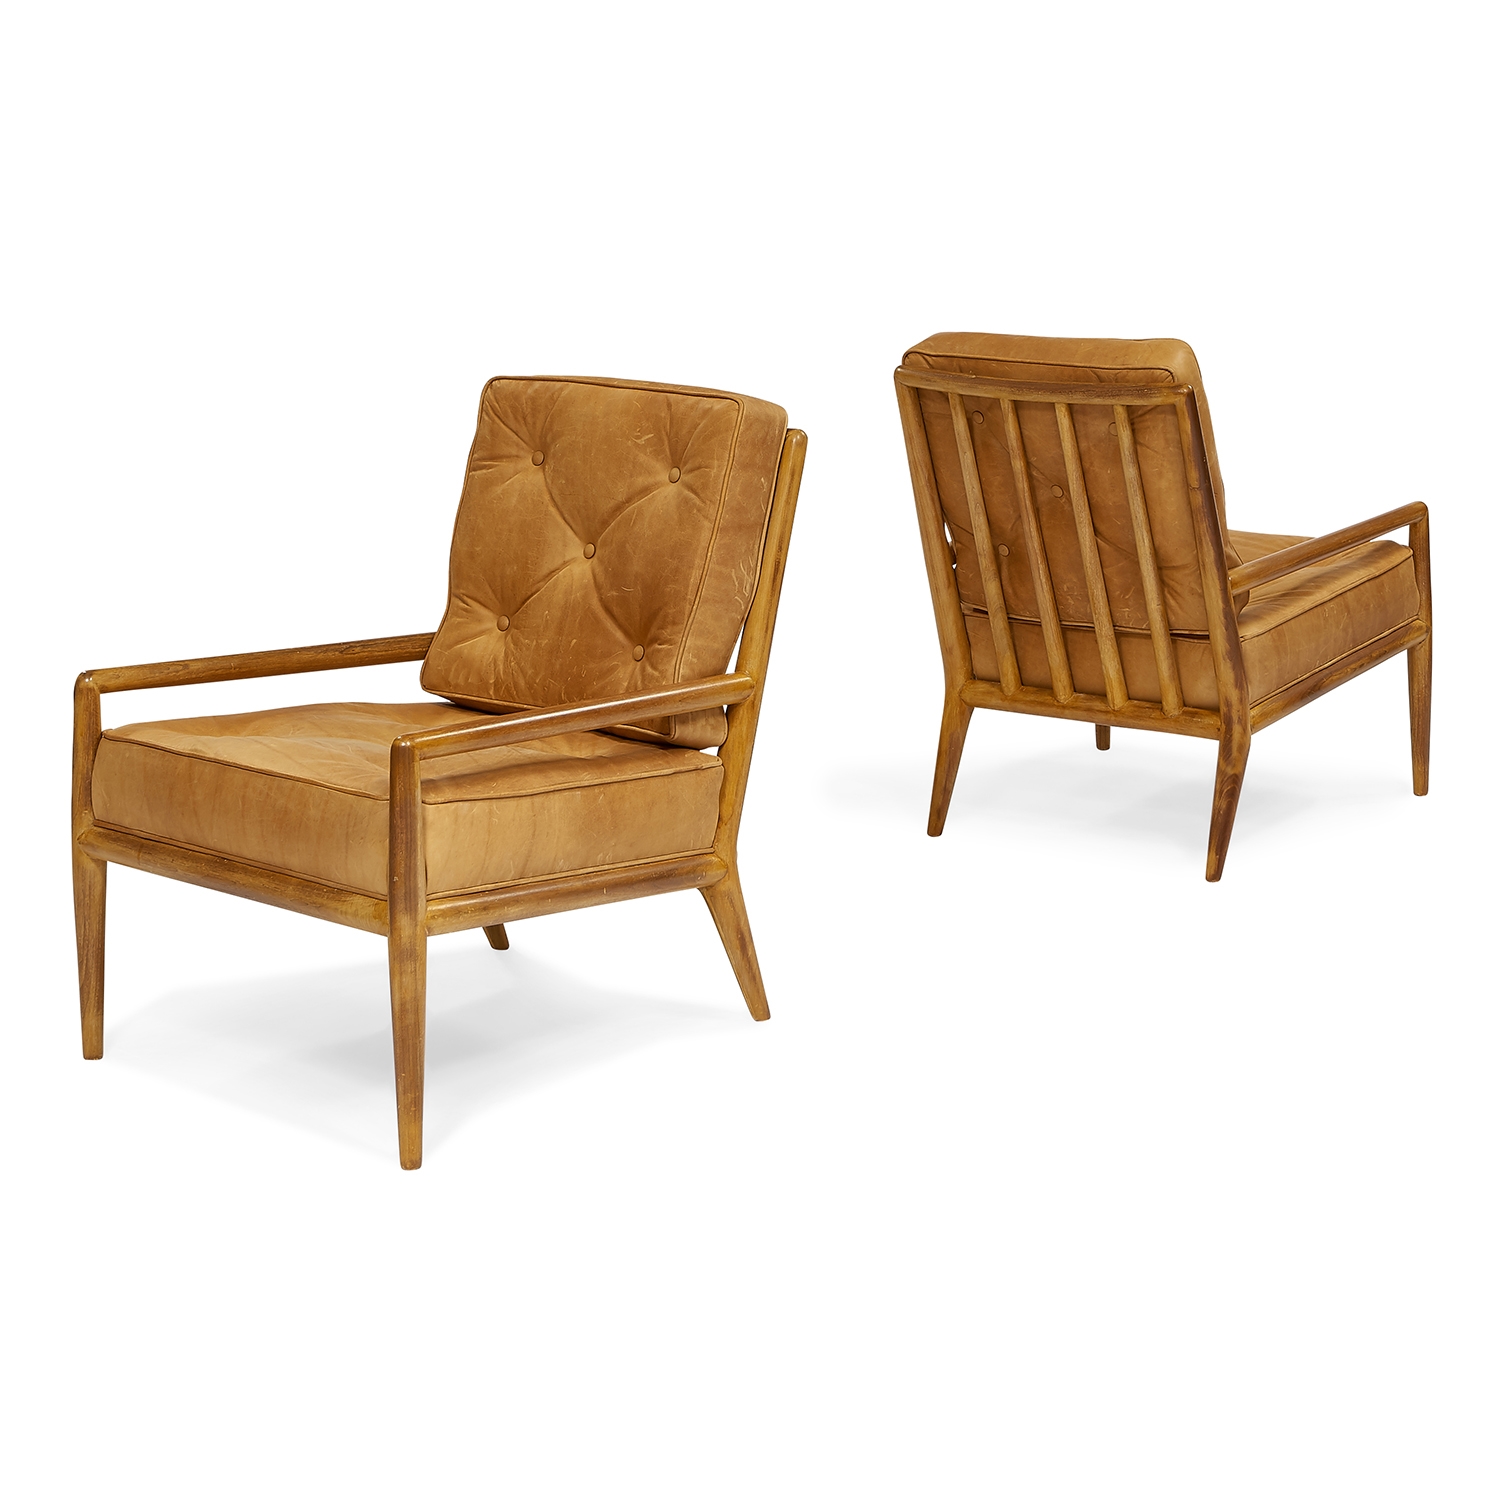 2 Works: Lounge Chairs